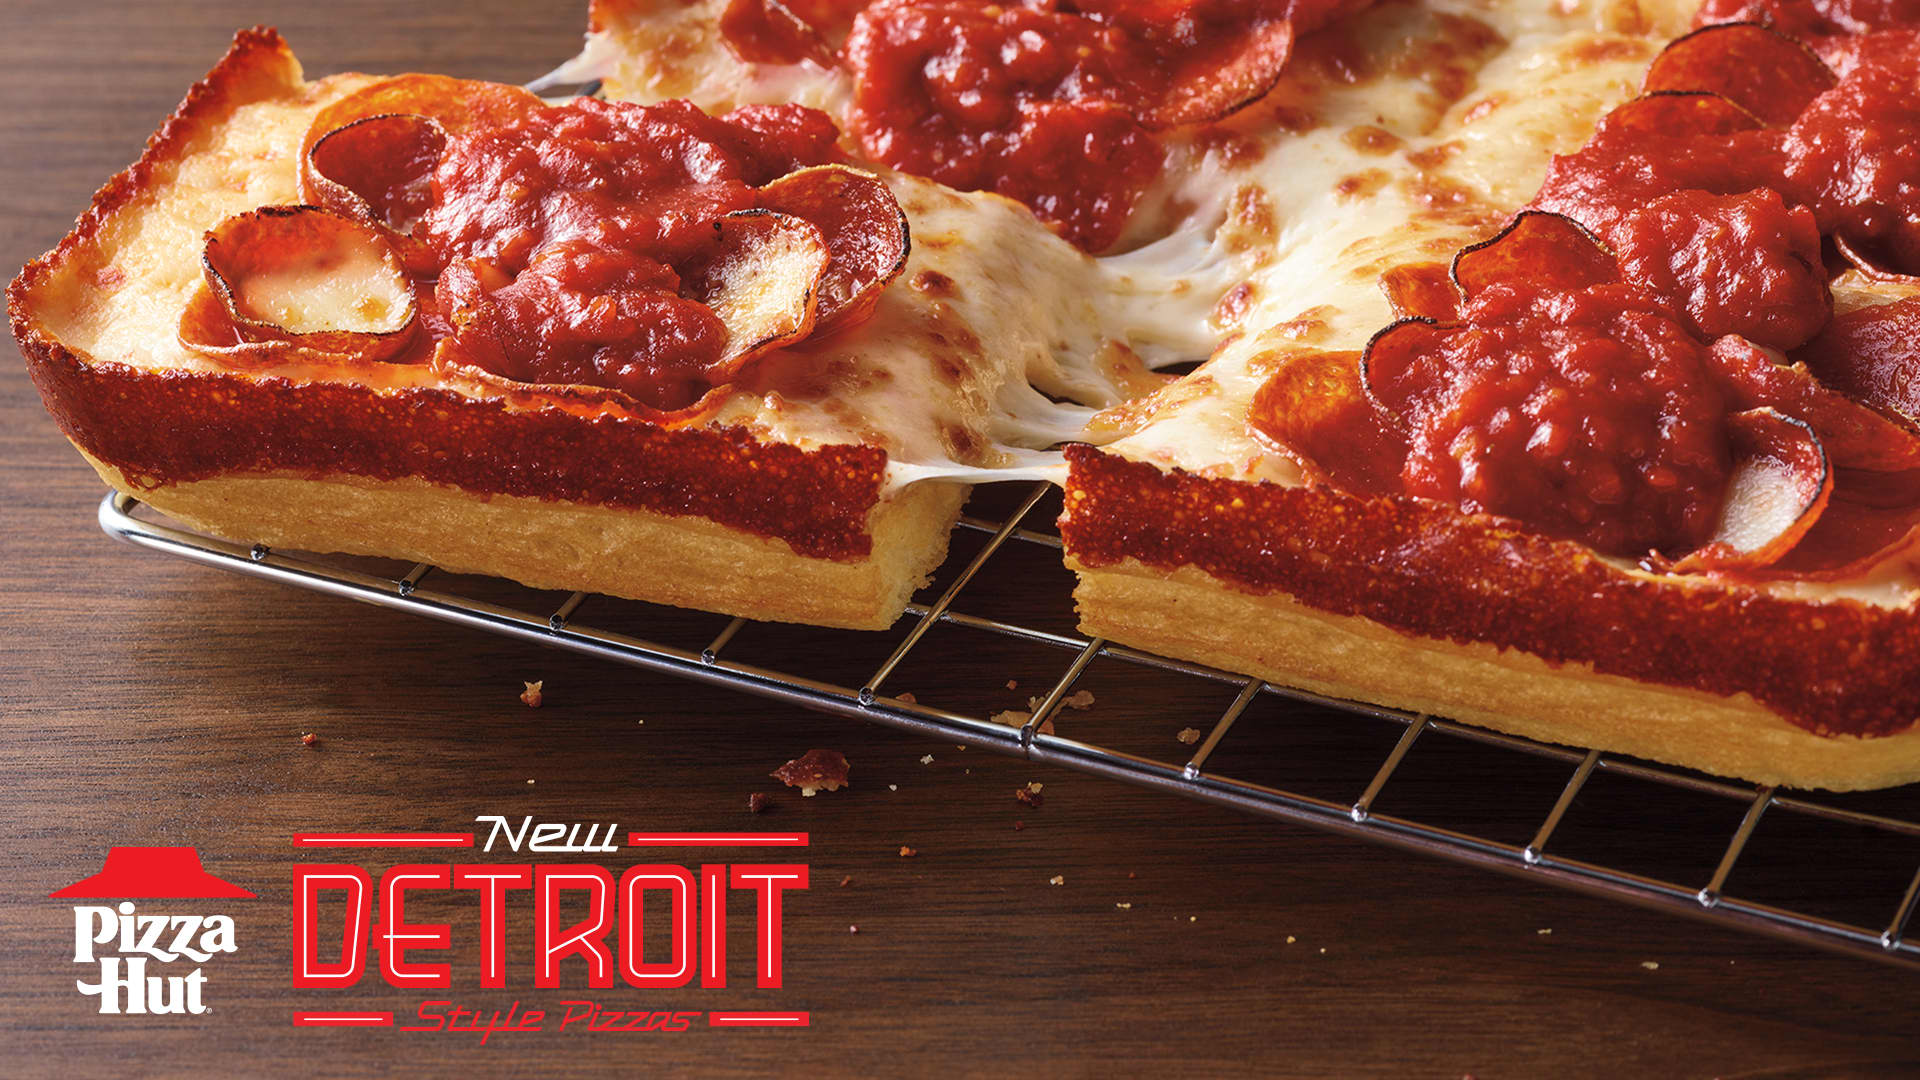 Pizza Hut launches Detroit-style pizza as its turnaround continues